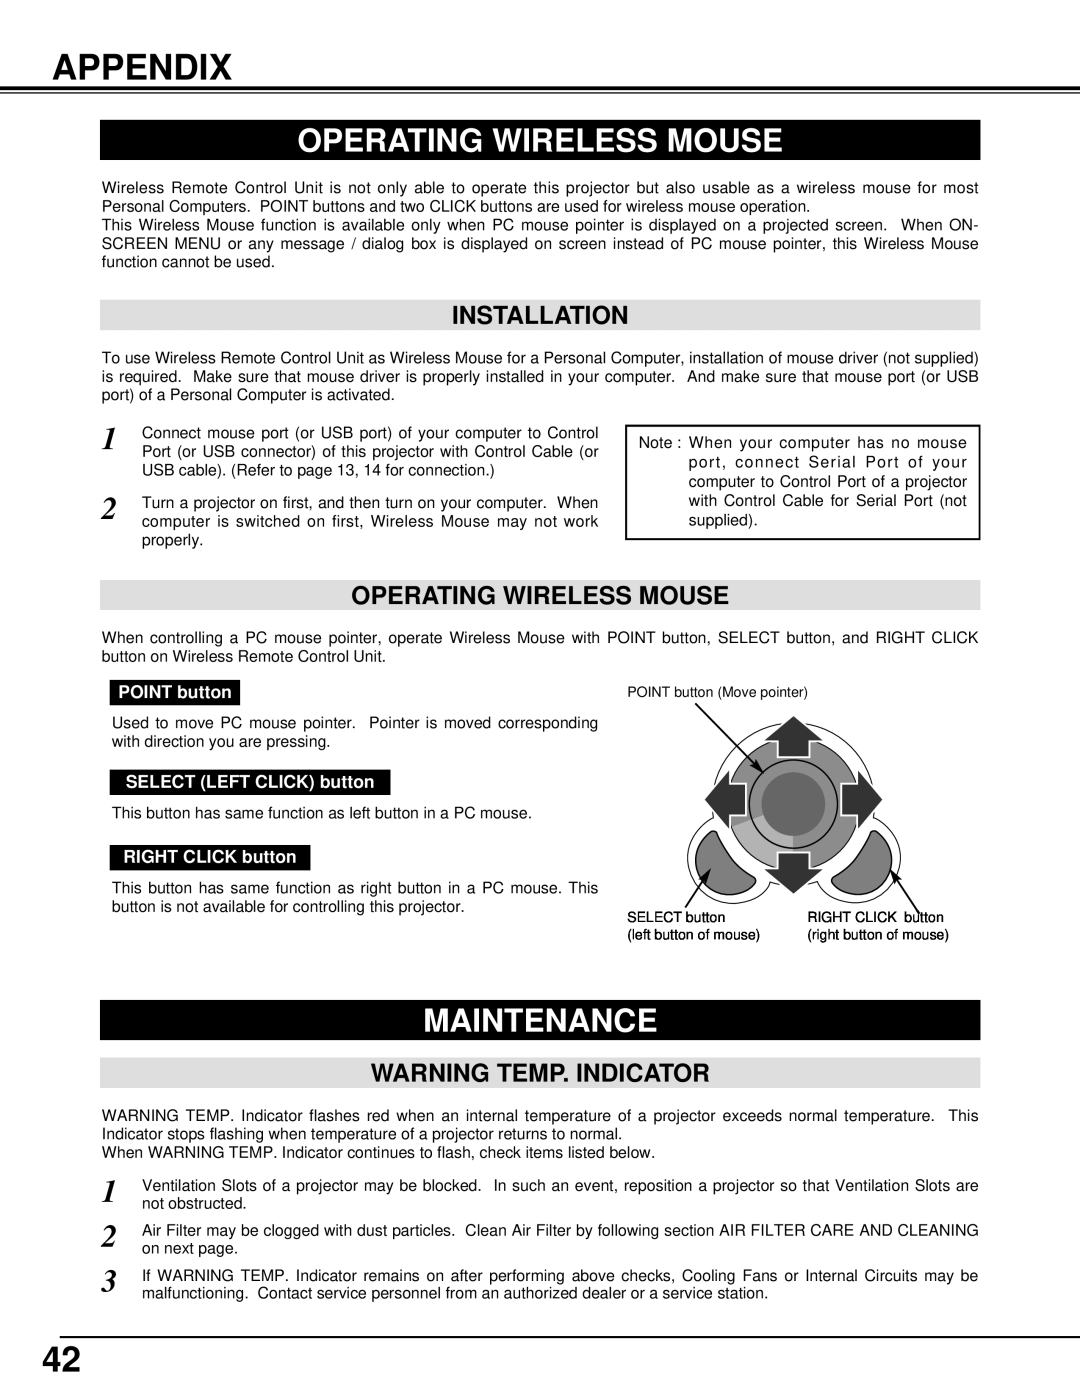 Christie Digital Systems 38-VIV301-01 user manual Appendix, Operating Wireless Mouse, Maintenance, Installation 